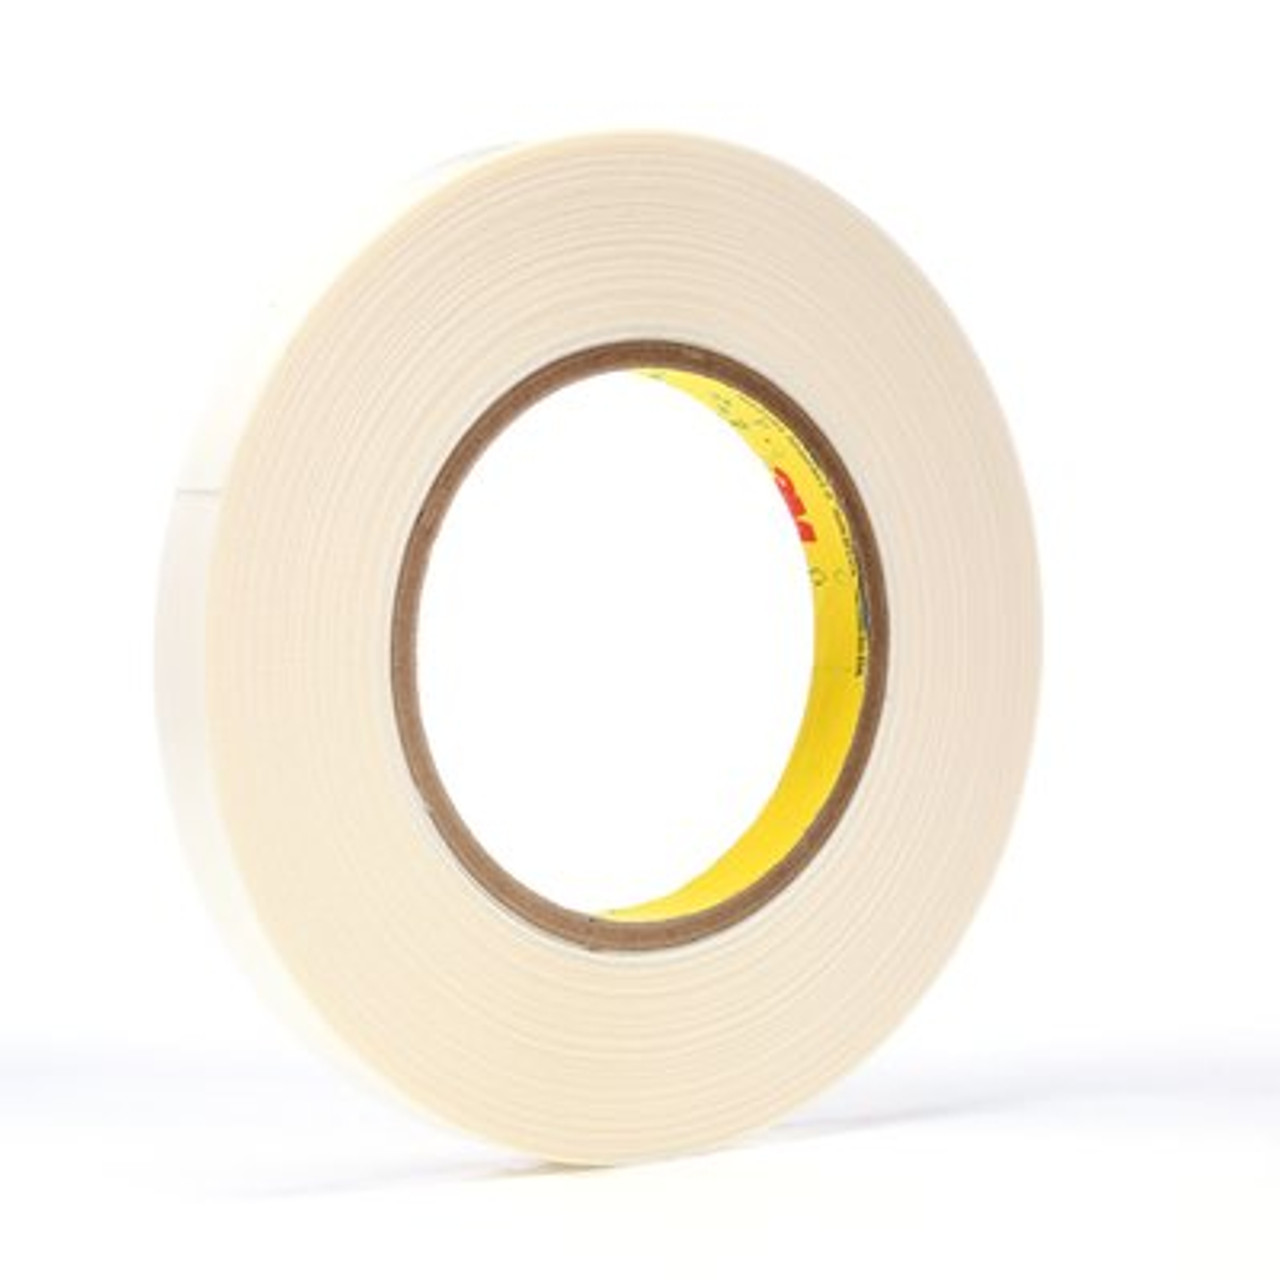 3M™ Double Coated Tape 9579, White, 1/2 in x 36 yd, 9 mil